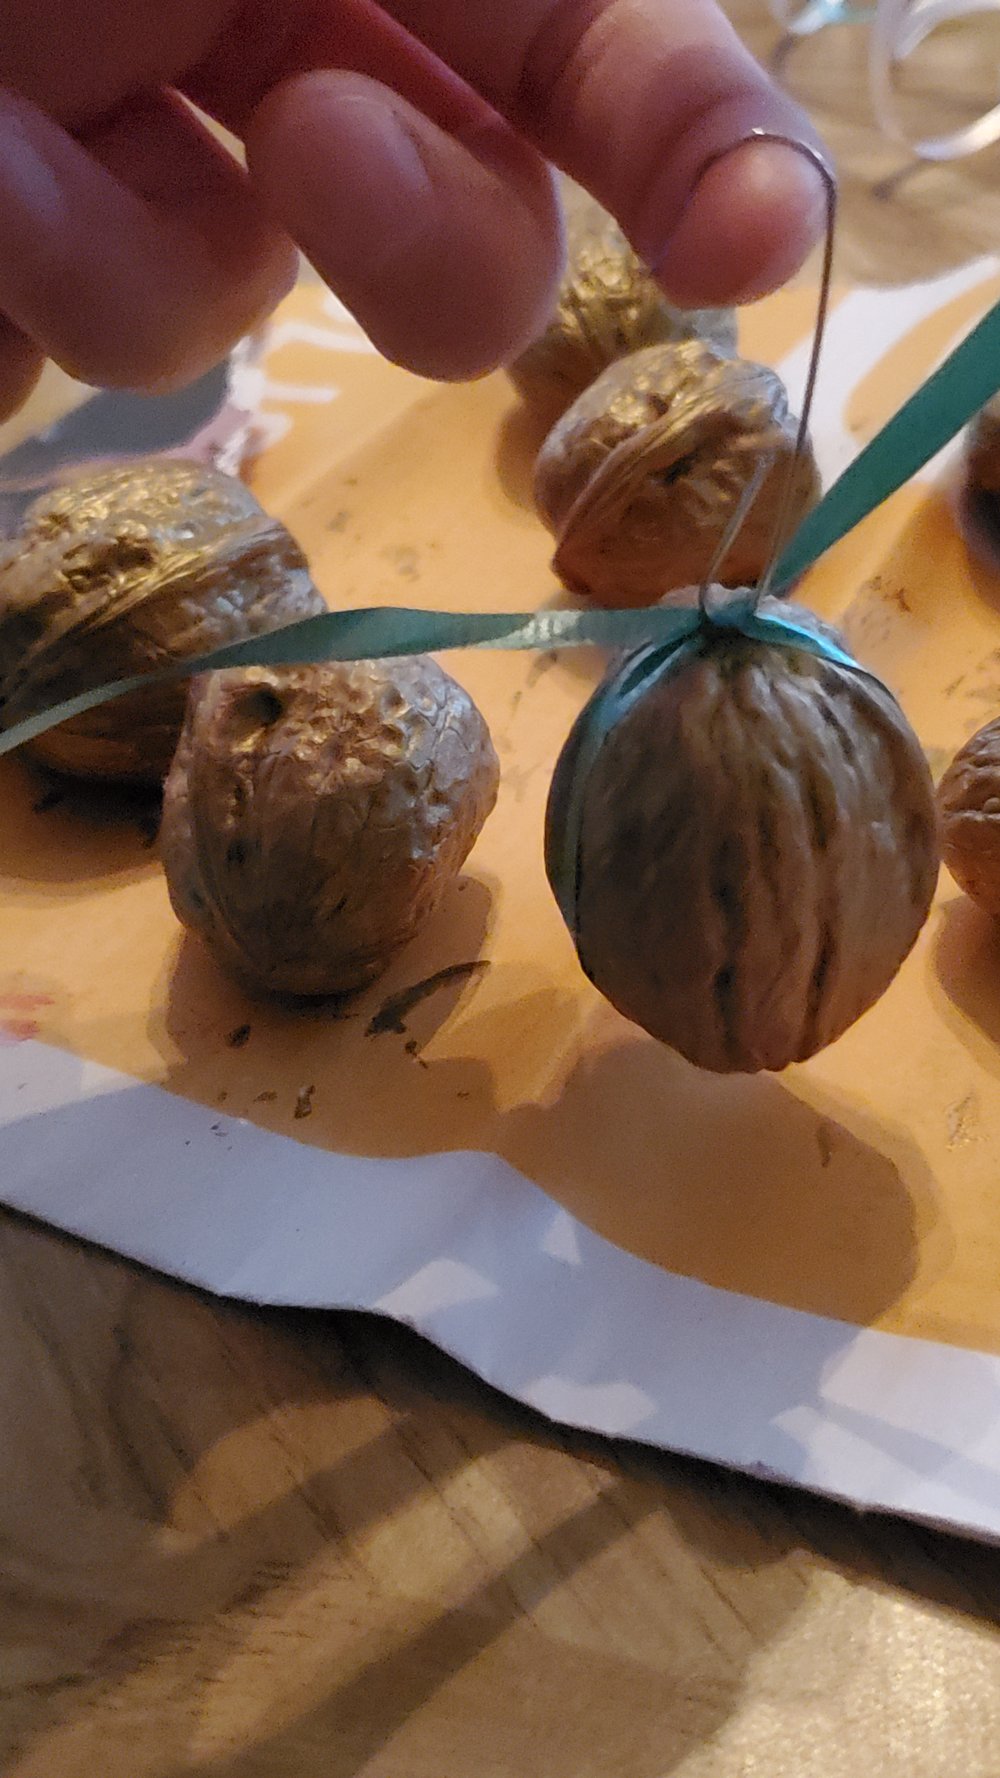  Once the paint has fully dried, tie a ribbon around the walnut and slip an ornament hook through it.  